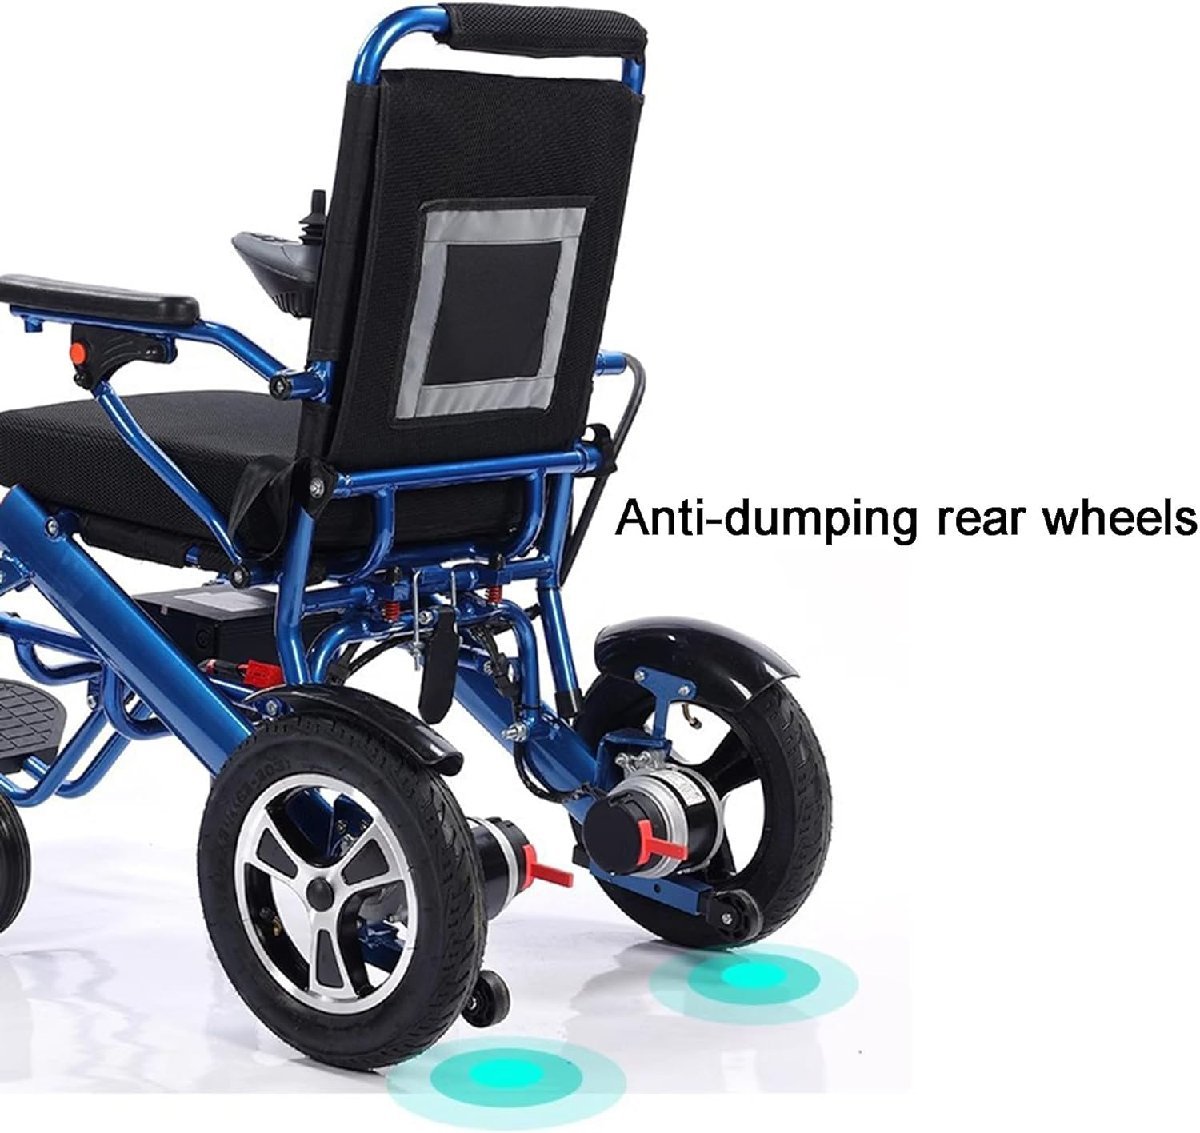  strong electric wheelchair seniours electric durability. exist wheelchair travel light weight scooter light convenient wheelchair 